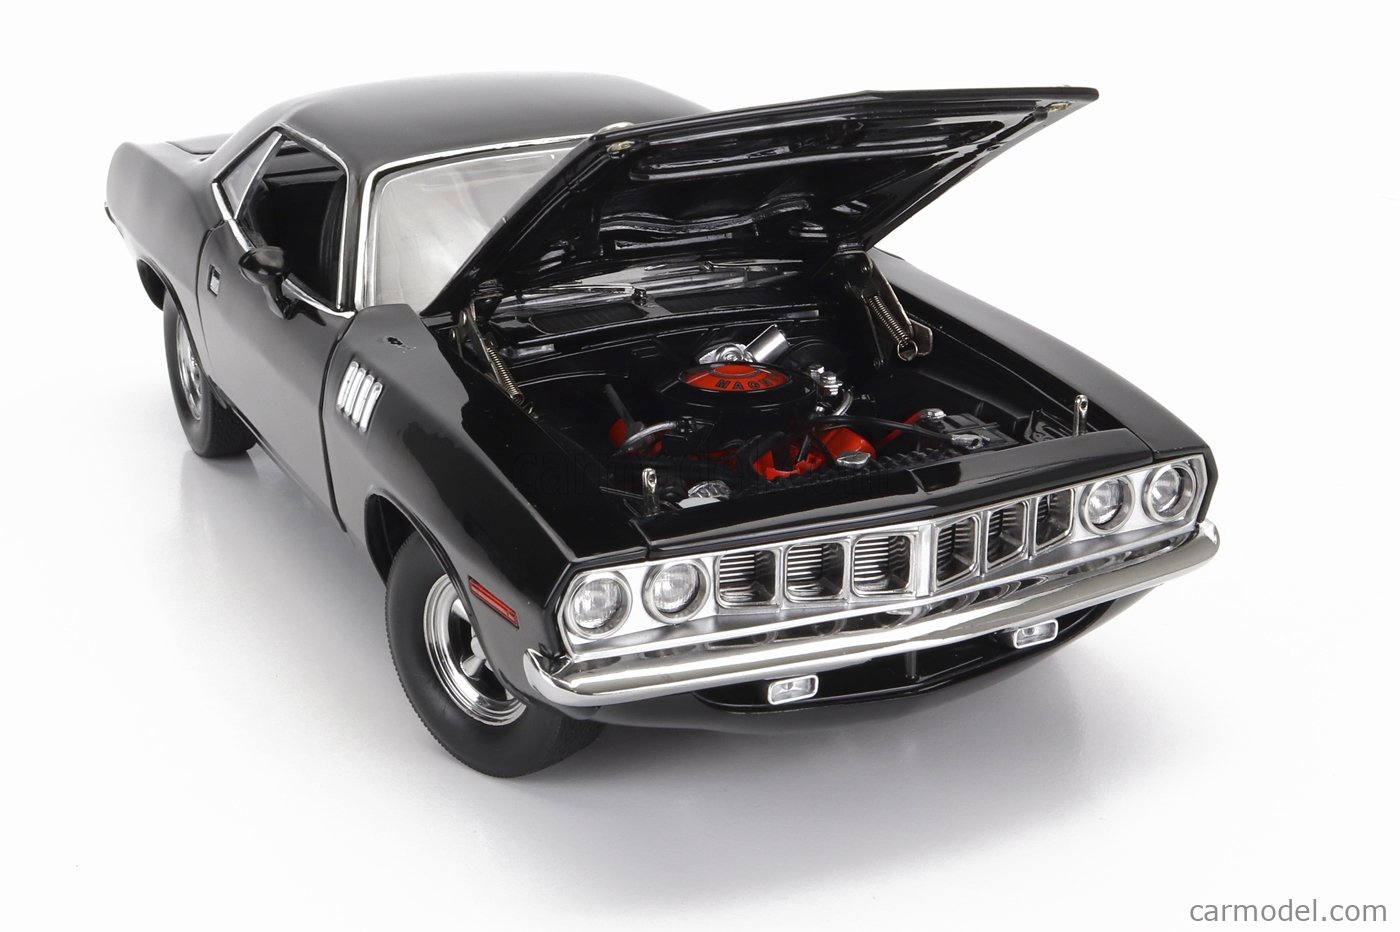 1:18 John Wick: Chapter 4 (2023) - 1971 Plymouth Cuda, Black by Highway 61  - Town and Country Toys